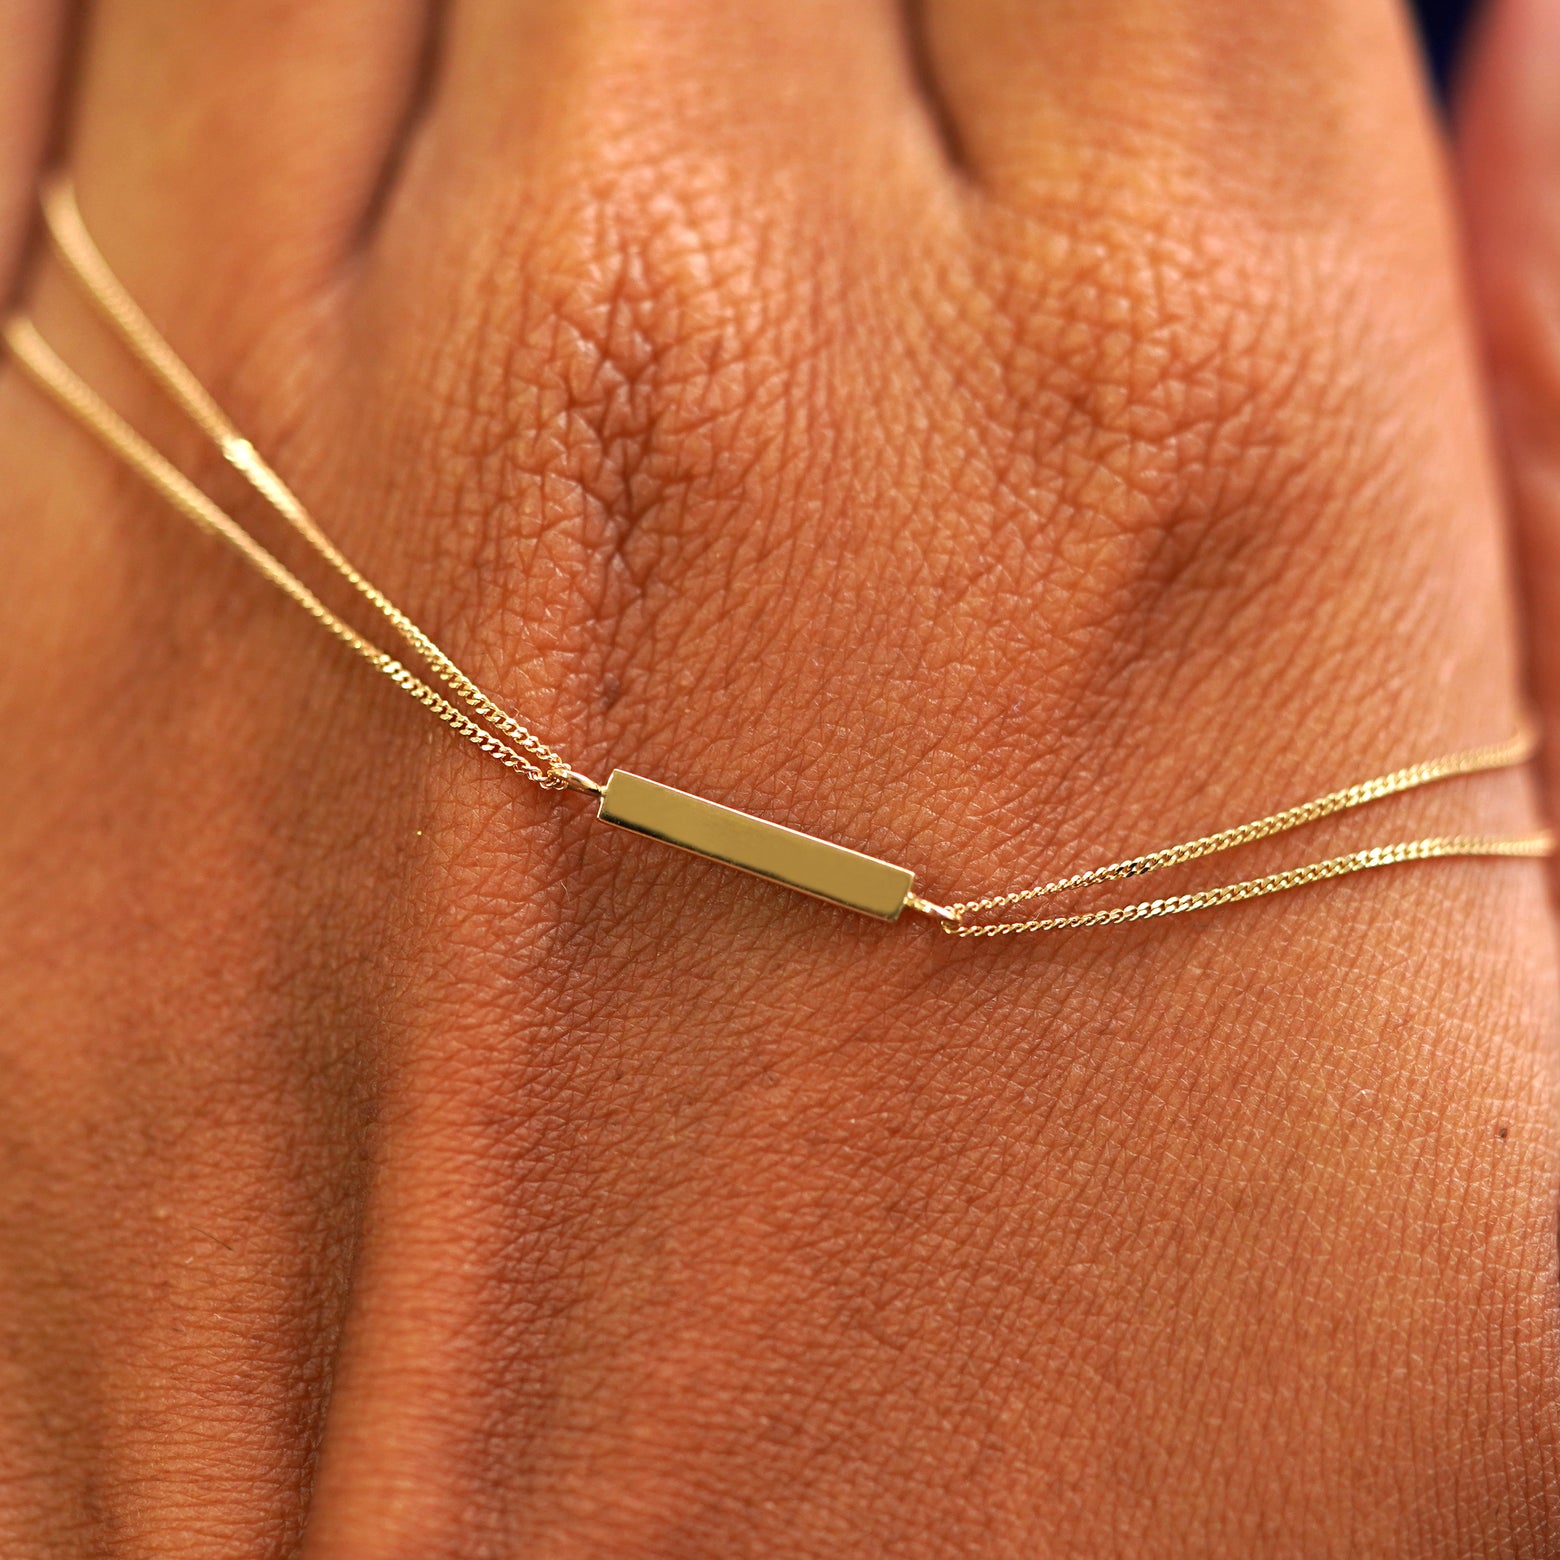 A solid gold Bar Bracelet resting on the back of a model's hand